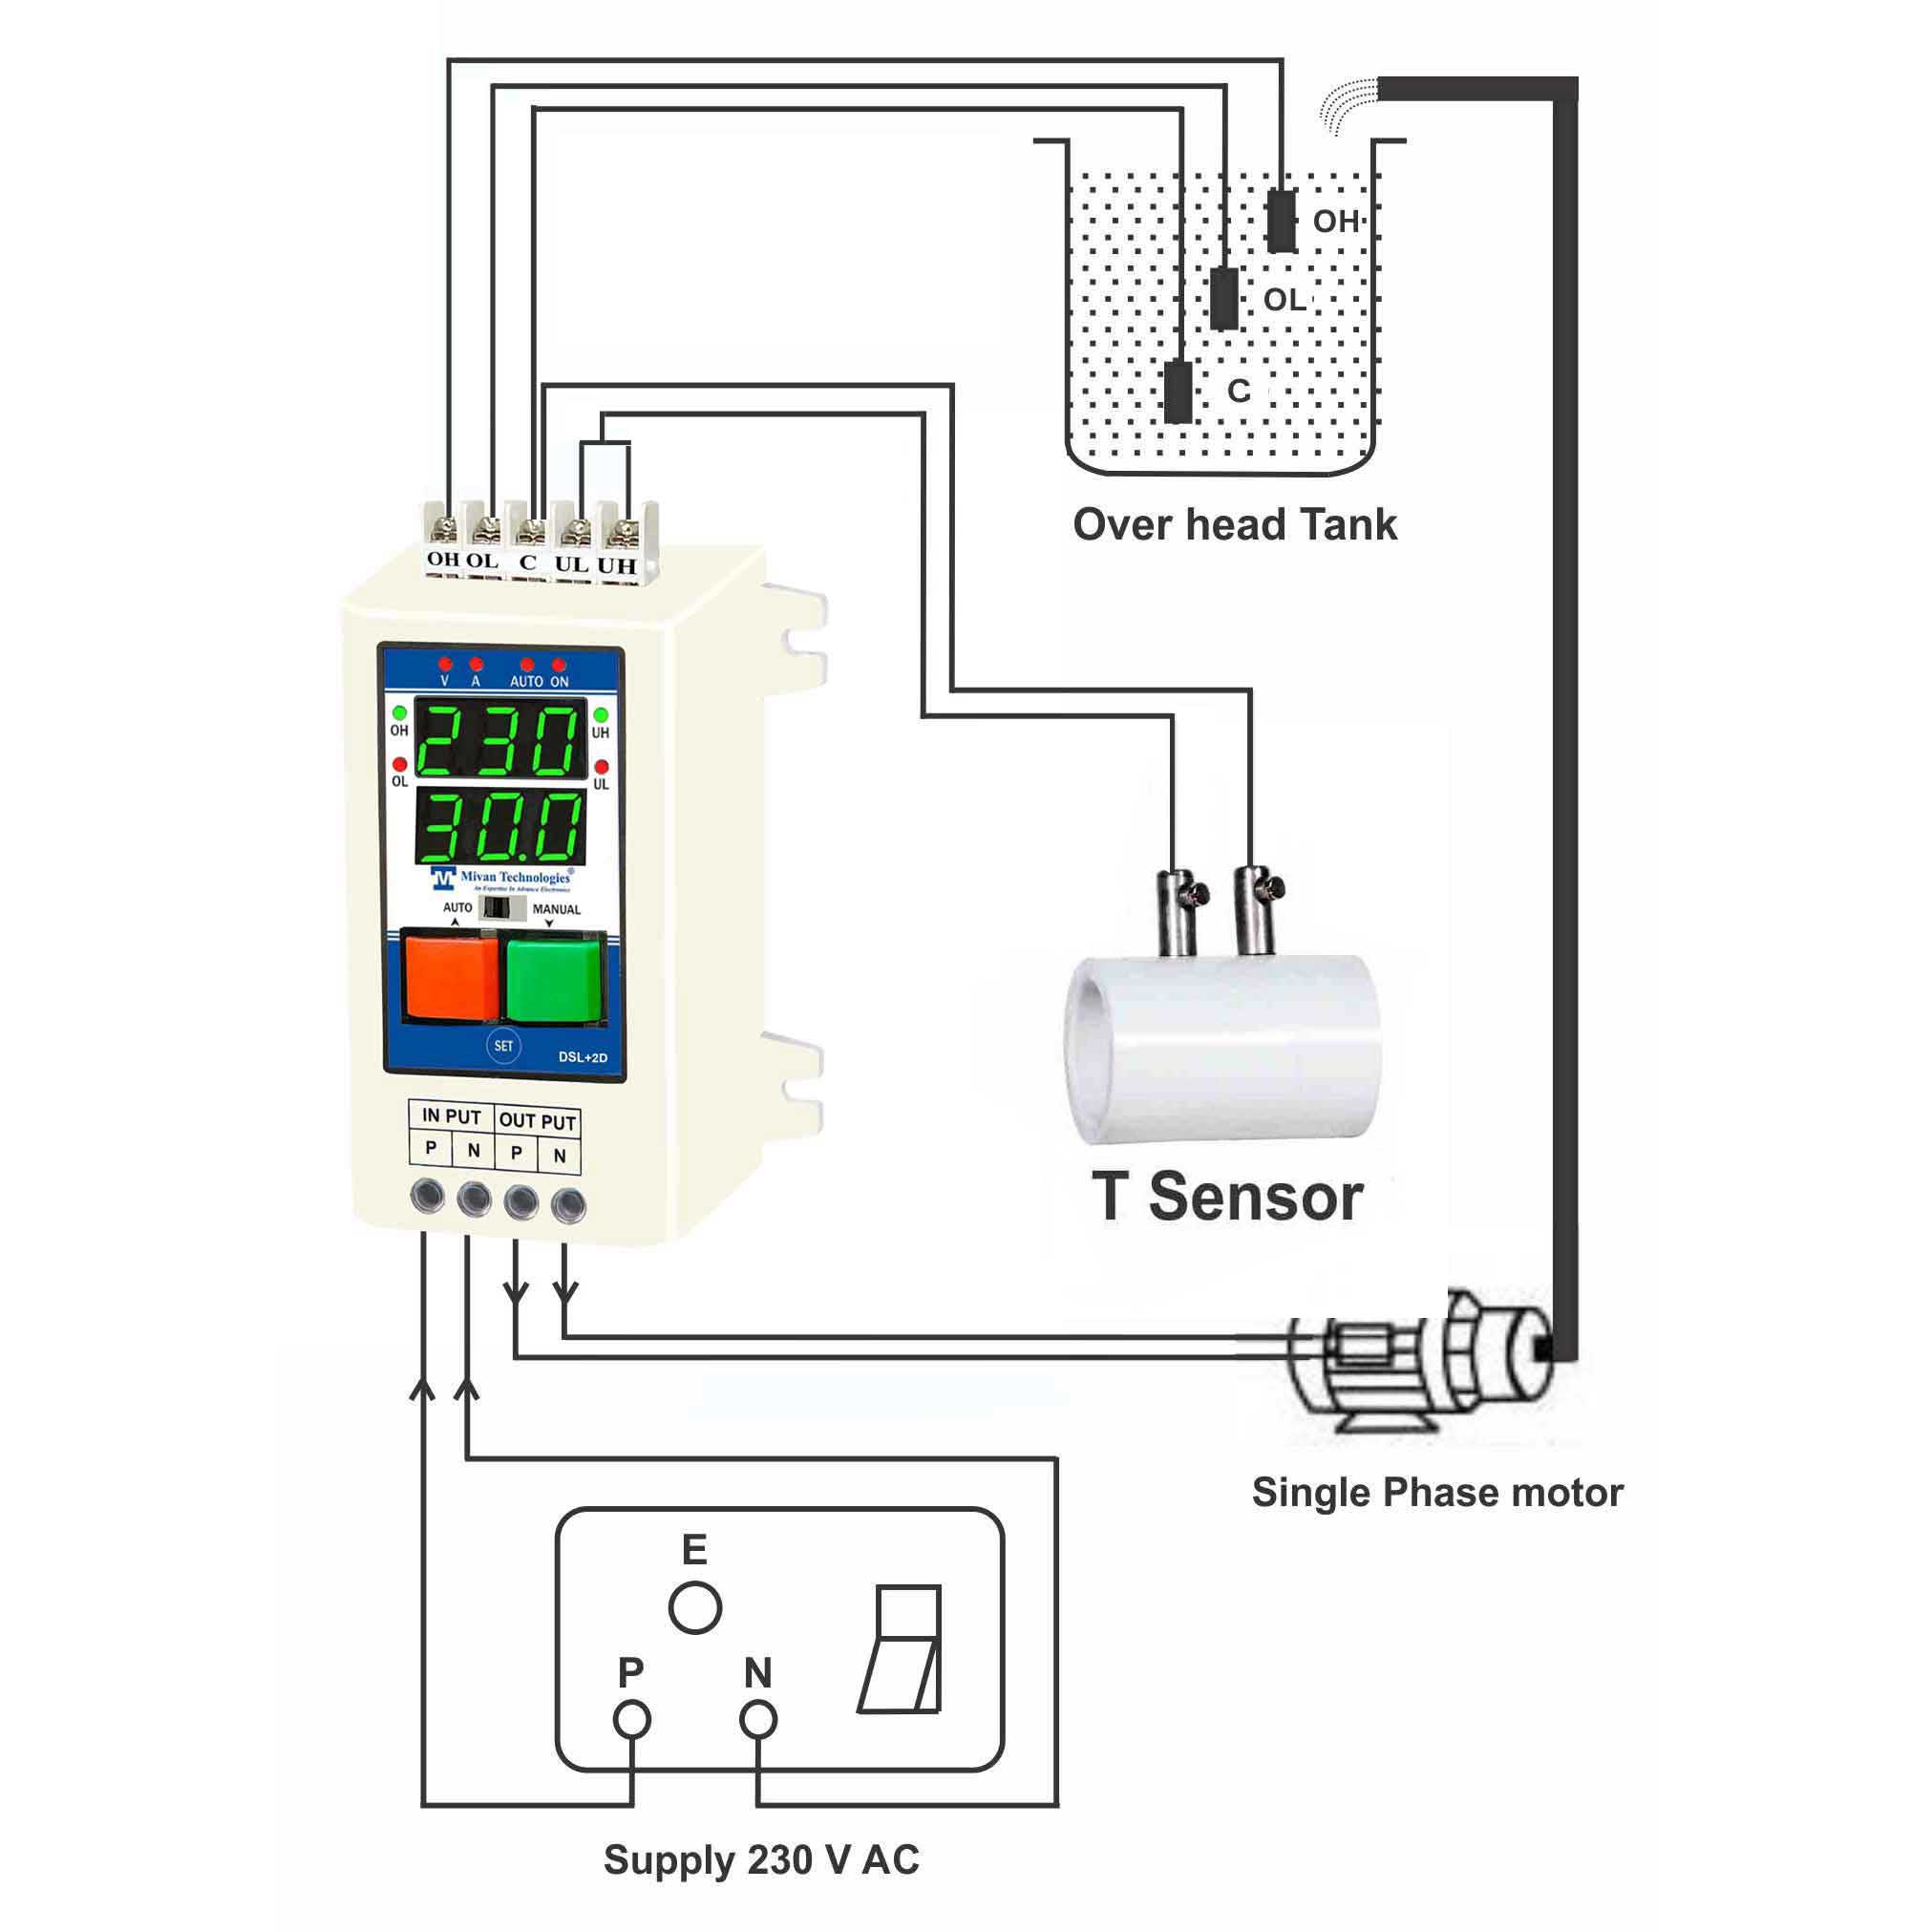 DSL T SENSOR With on delay timer When water comes in municipal line it starts the motor and when upper tank full it stops the motor